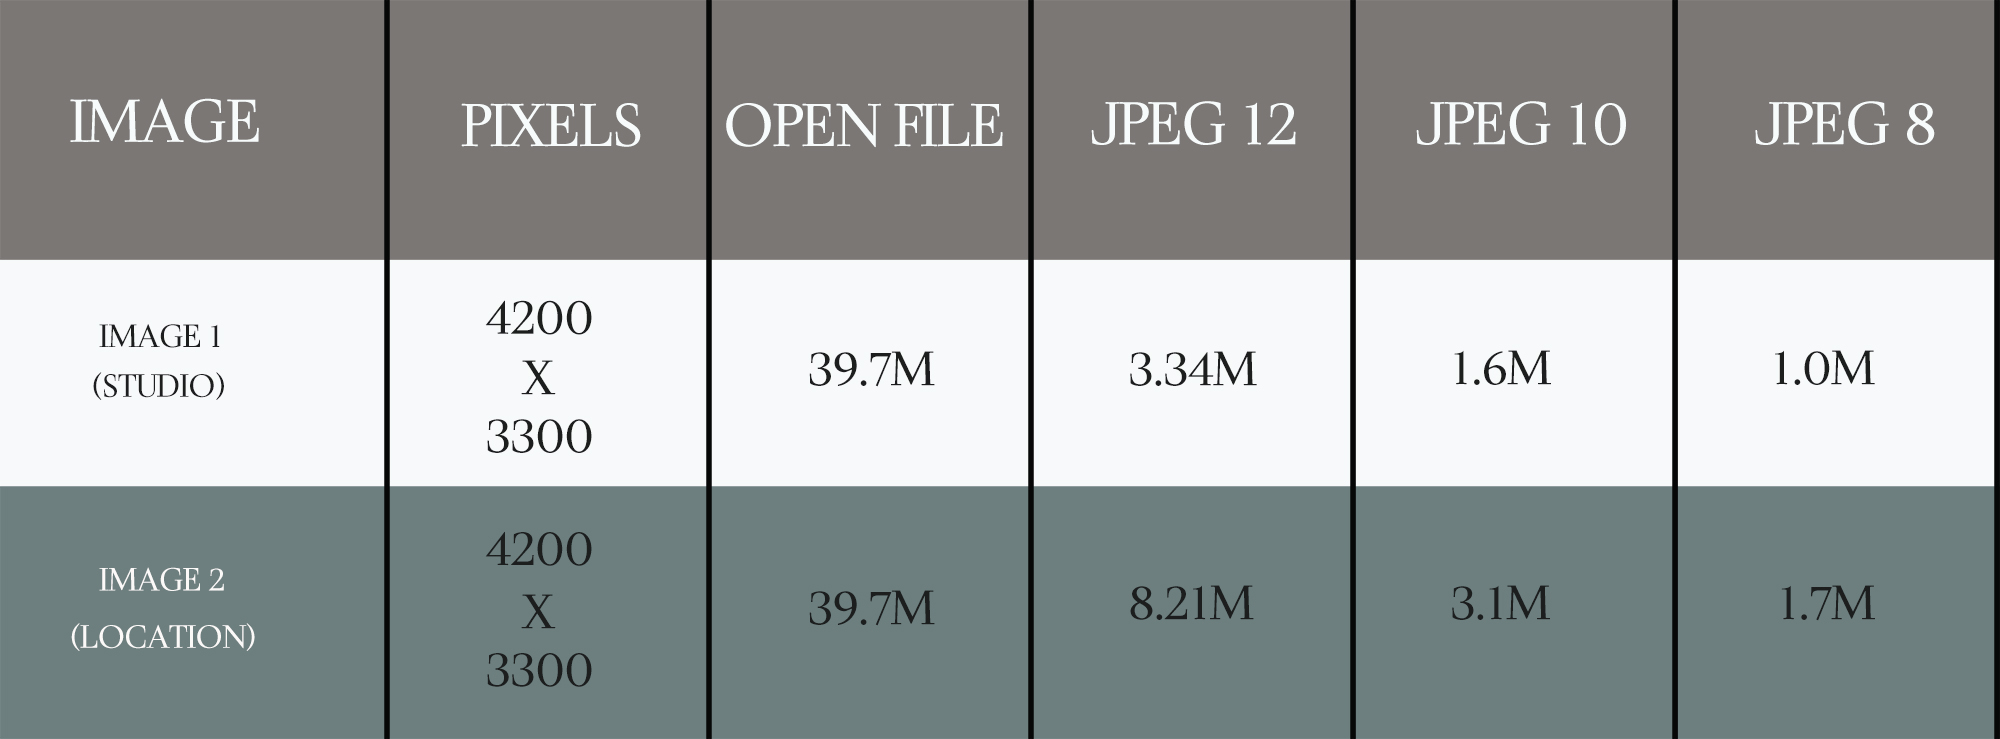 Chart explaining difference in uncompressed file size and jpeg file size